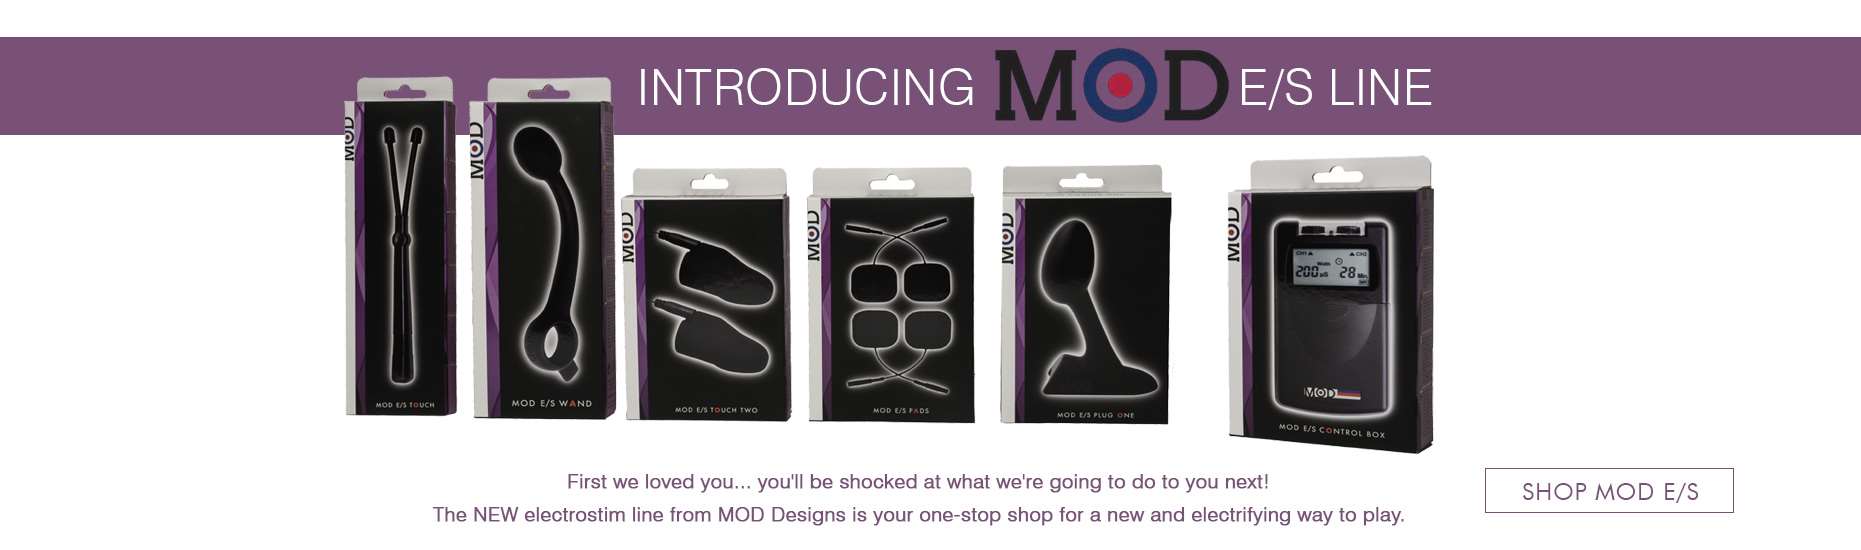 The NEW electrostim line from MOD Designs is your one-stop shop for a new and electrifying way to play.